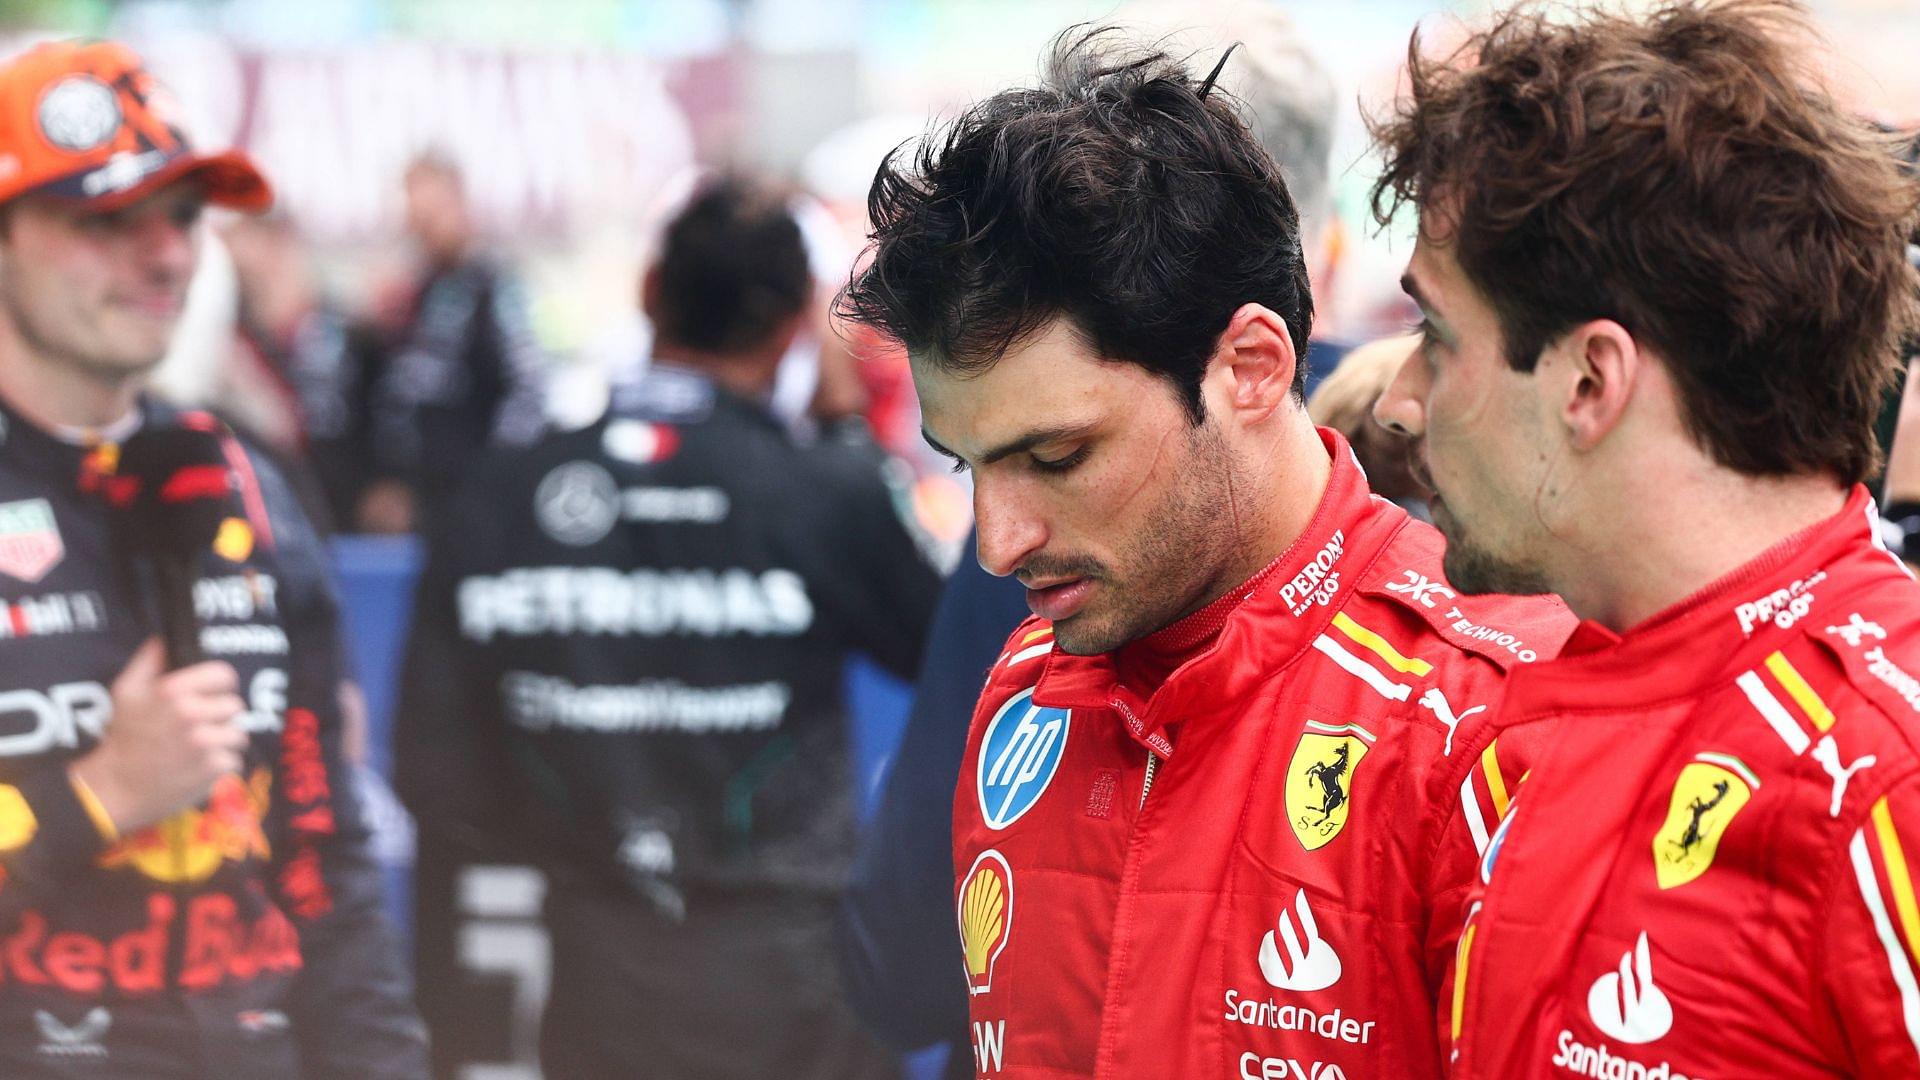 “Always Going to Be Little Ding-Dongs”: Carlos Sainz Puts a Band-Aid on Charles Leclerc Rift